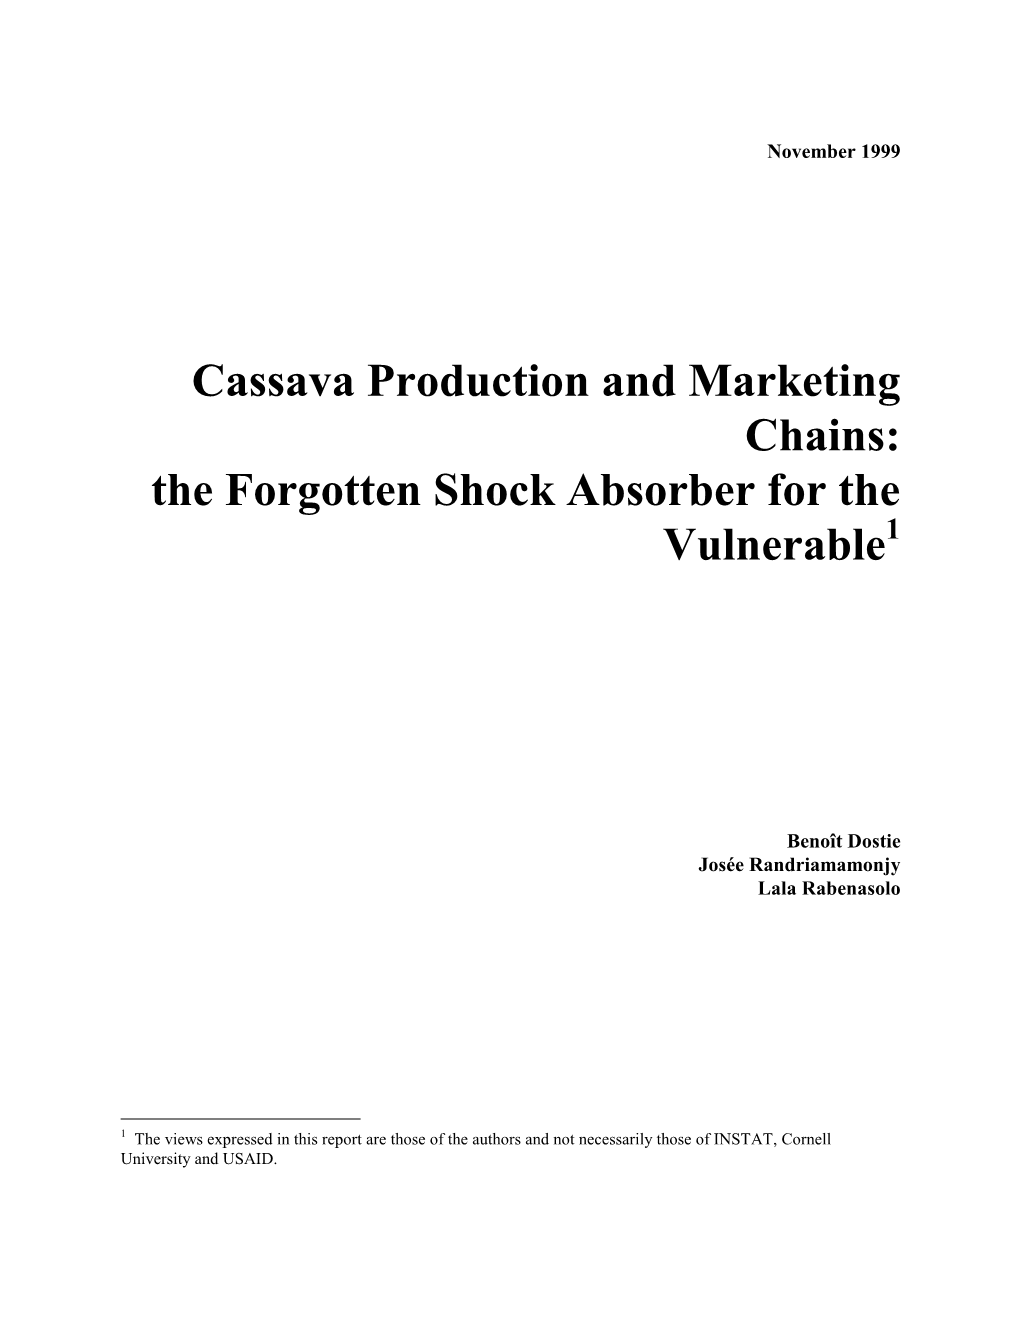 Cassava Production and Marketing Chains: the Forgotten Shock Absorber for the Vulnerable1